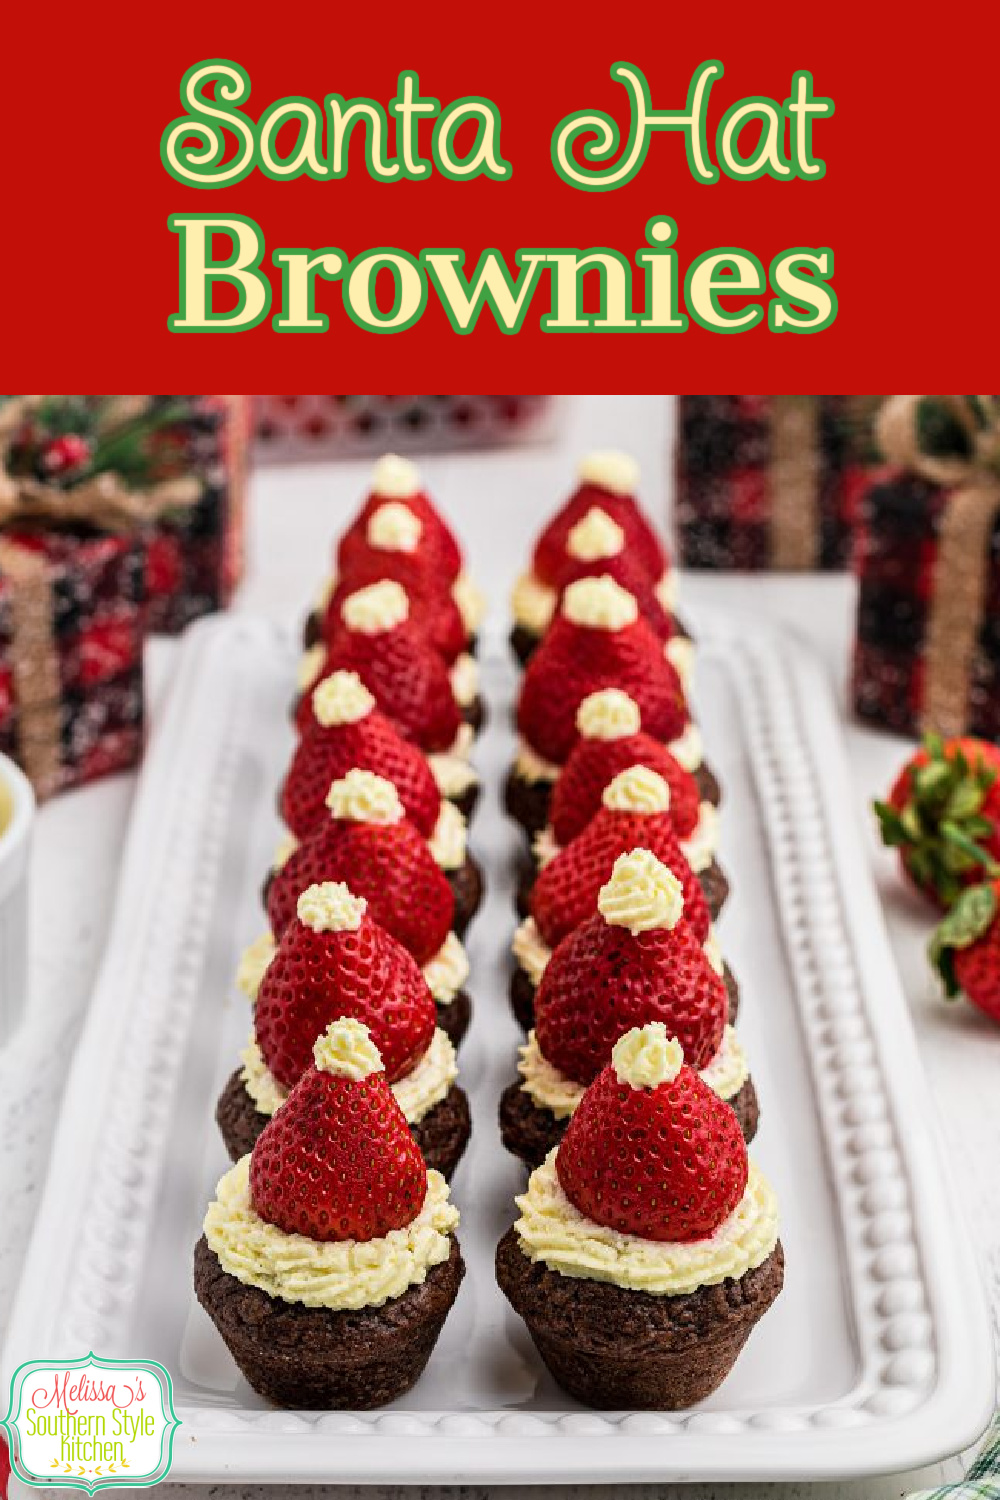 These cute as a button Santa Hat Brownies are a whimsical two bite dessert that will be the talk of your holiday goodies #santahatbrownies #santa #santahats #browniebites #brownies #christmasdesserts #christmasrecipes #strawberries